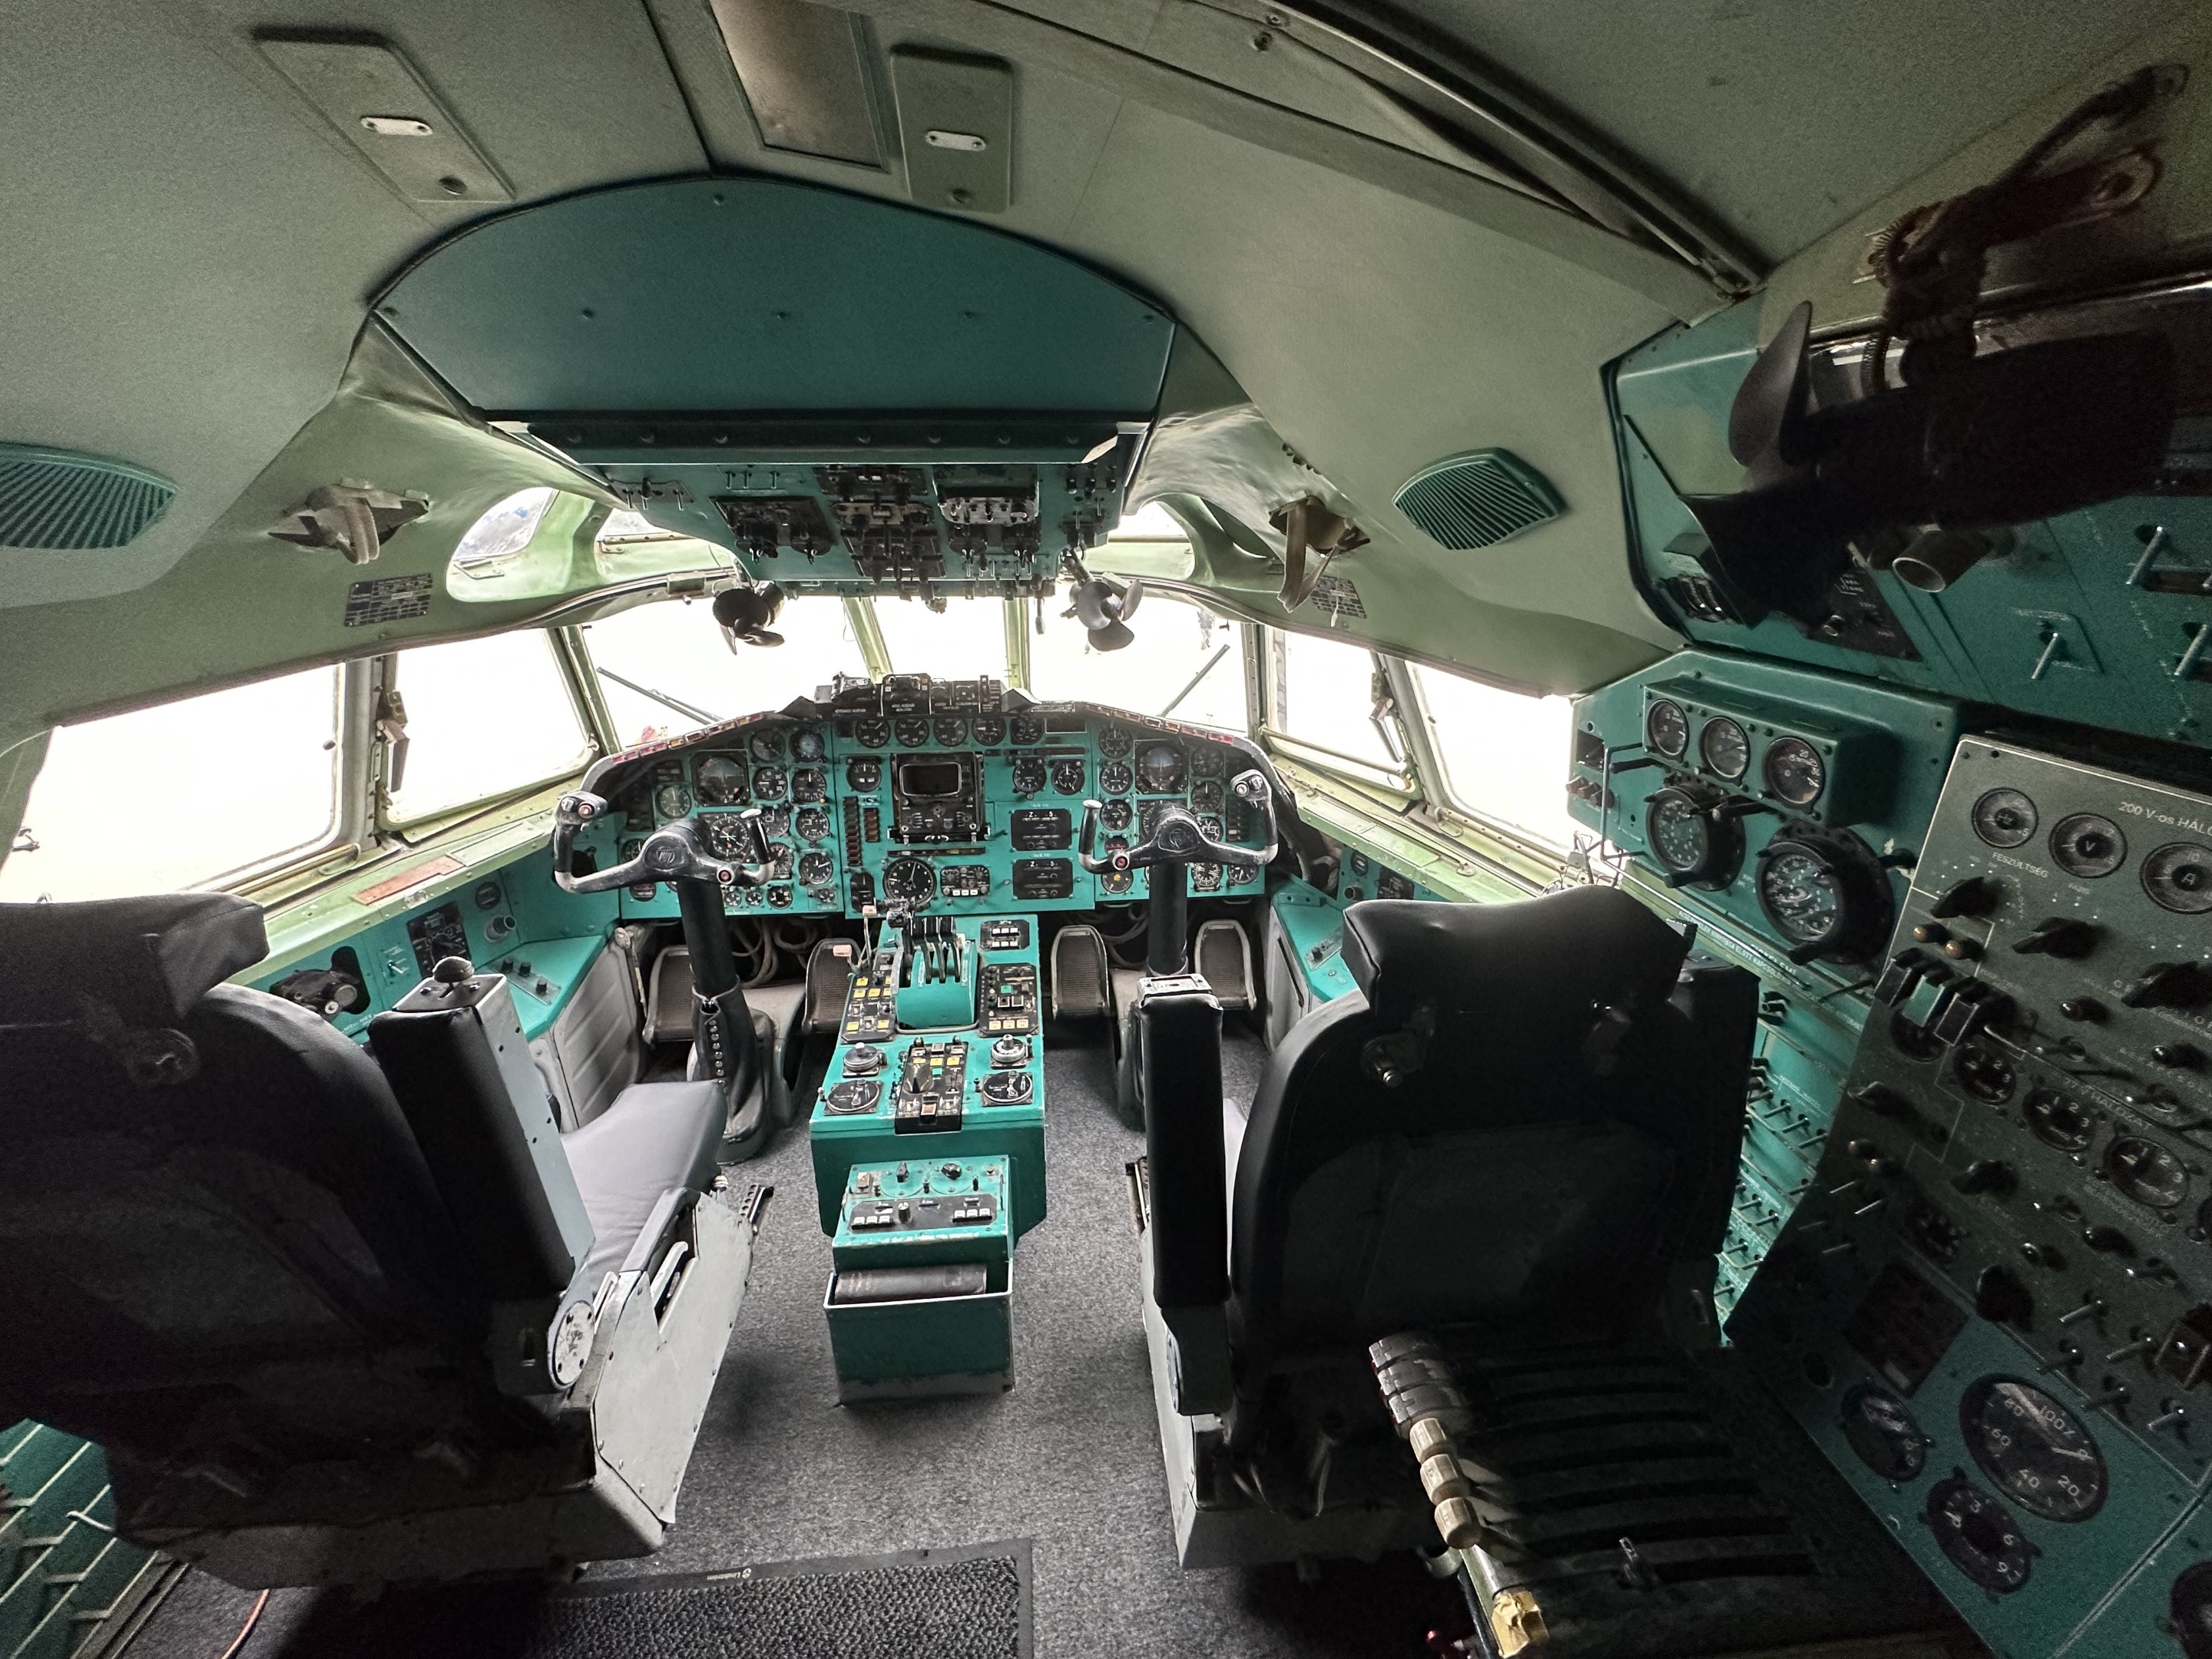 Inside one of the cockpits